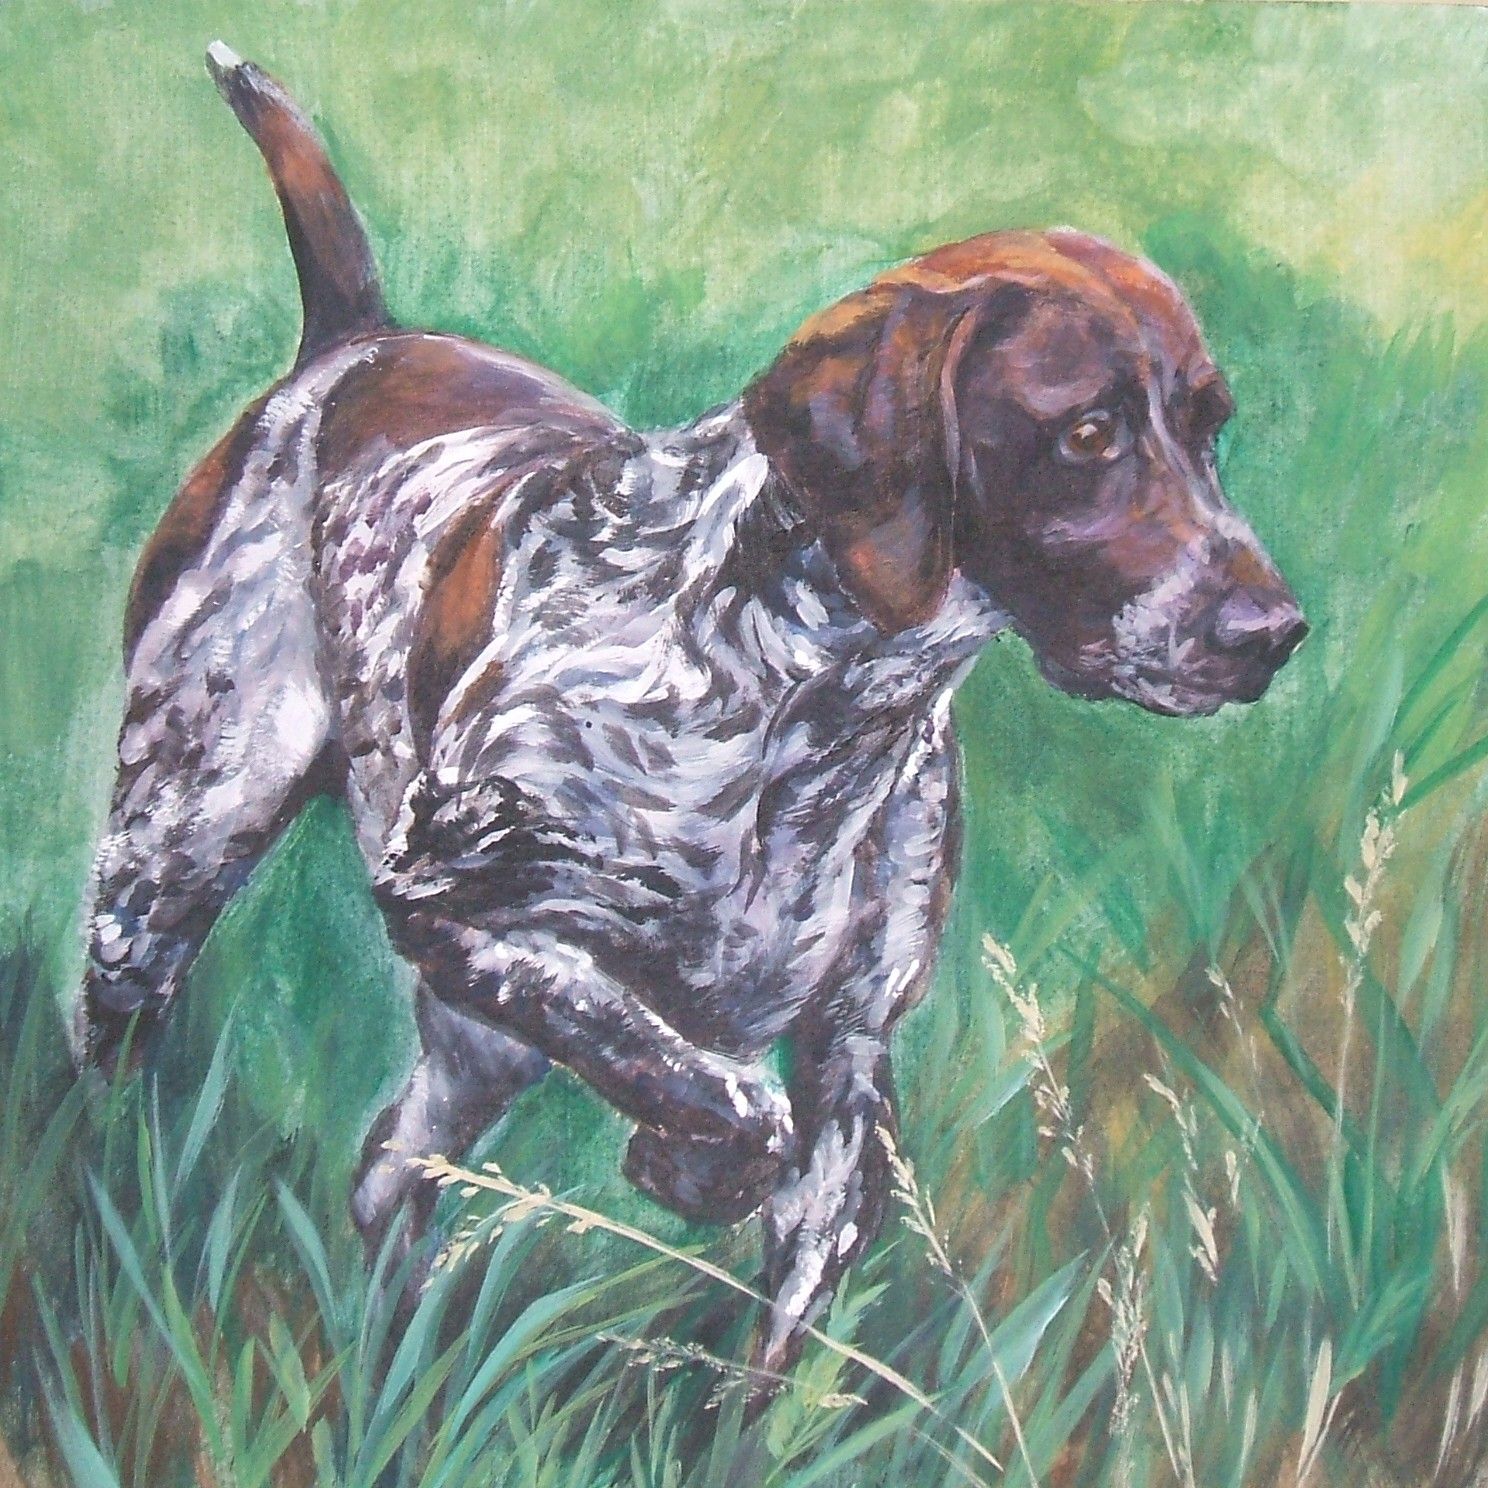 German Shorthaired Pointer photo and wallpaper. The beautiful German Shorthaired Pointer picture